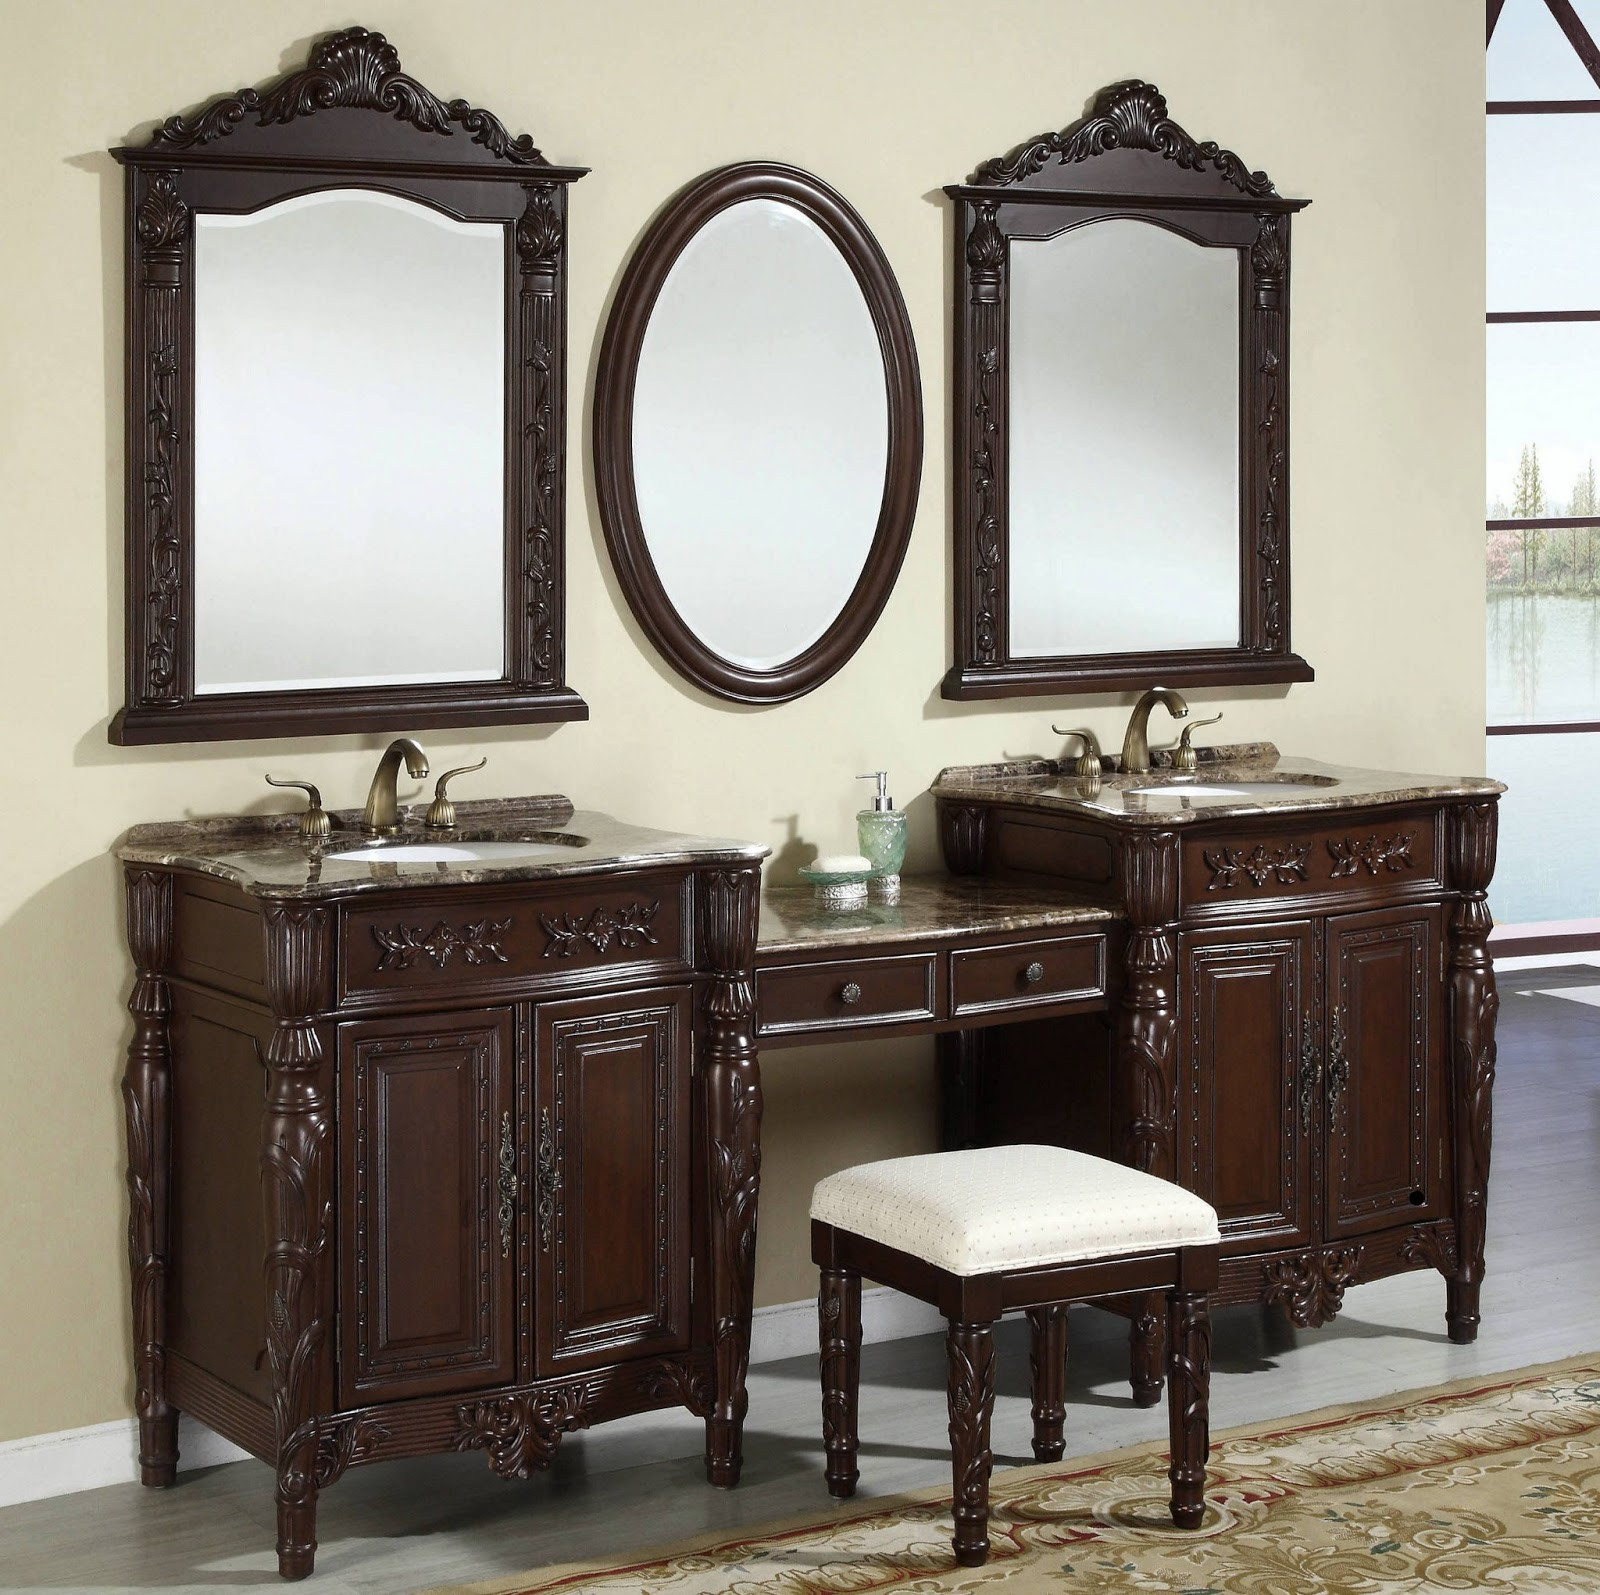 Mirror Bathroom Cabinet
 Bathroom Vanity Mirrors Models and Buying Tips Cabinets